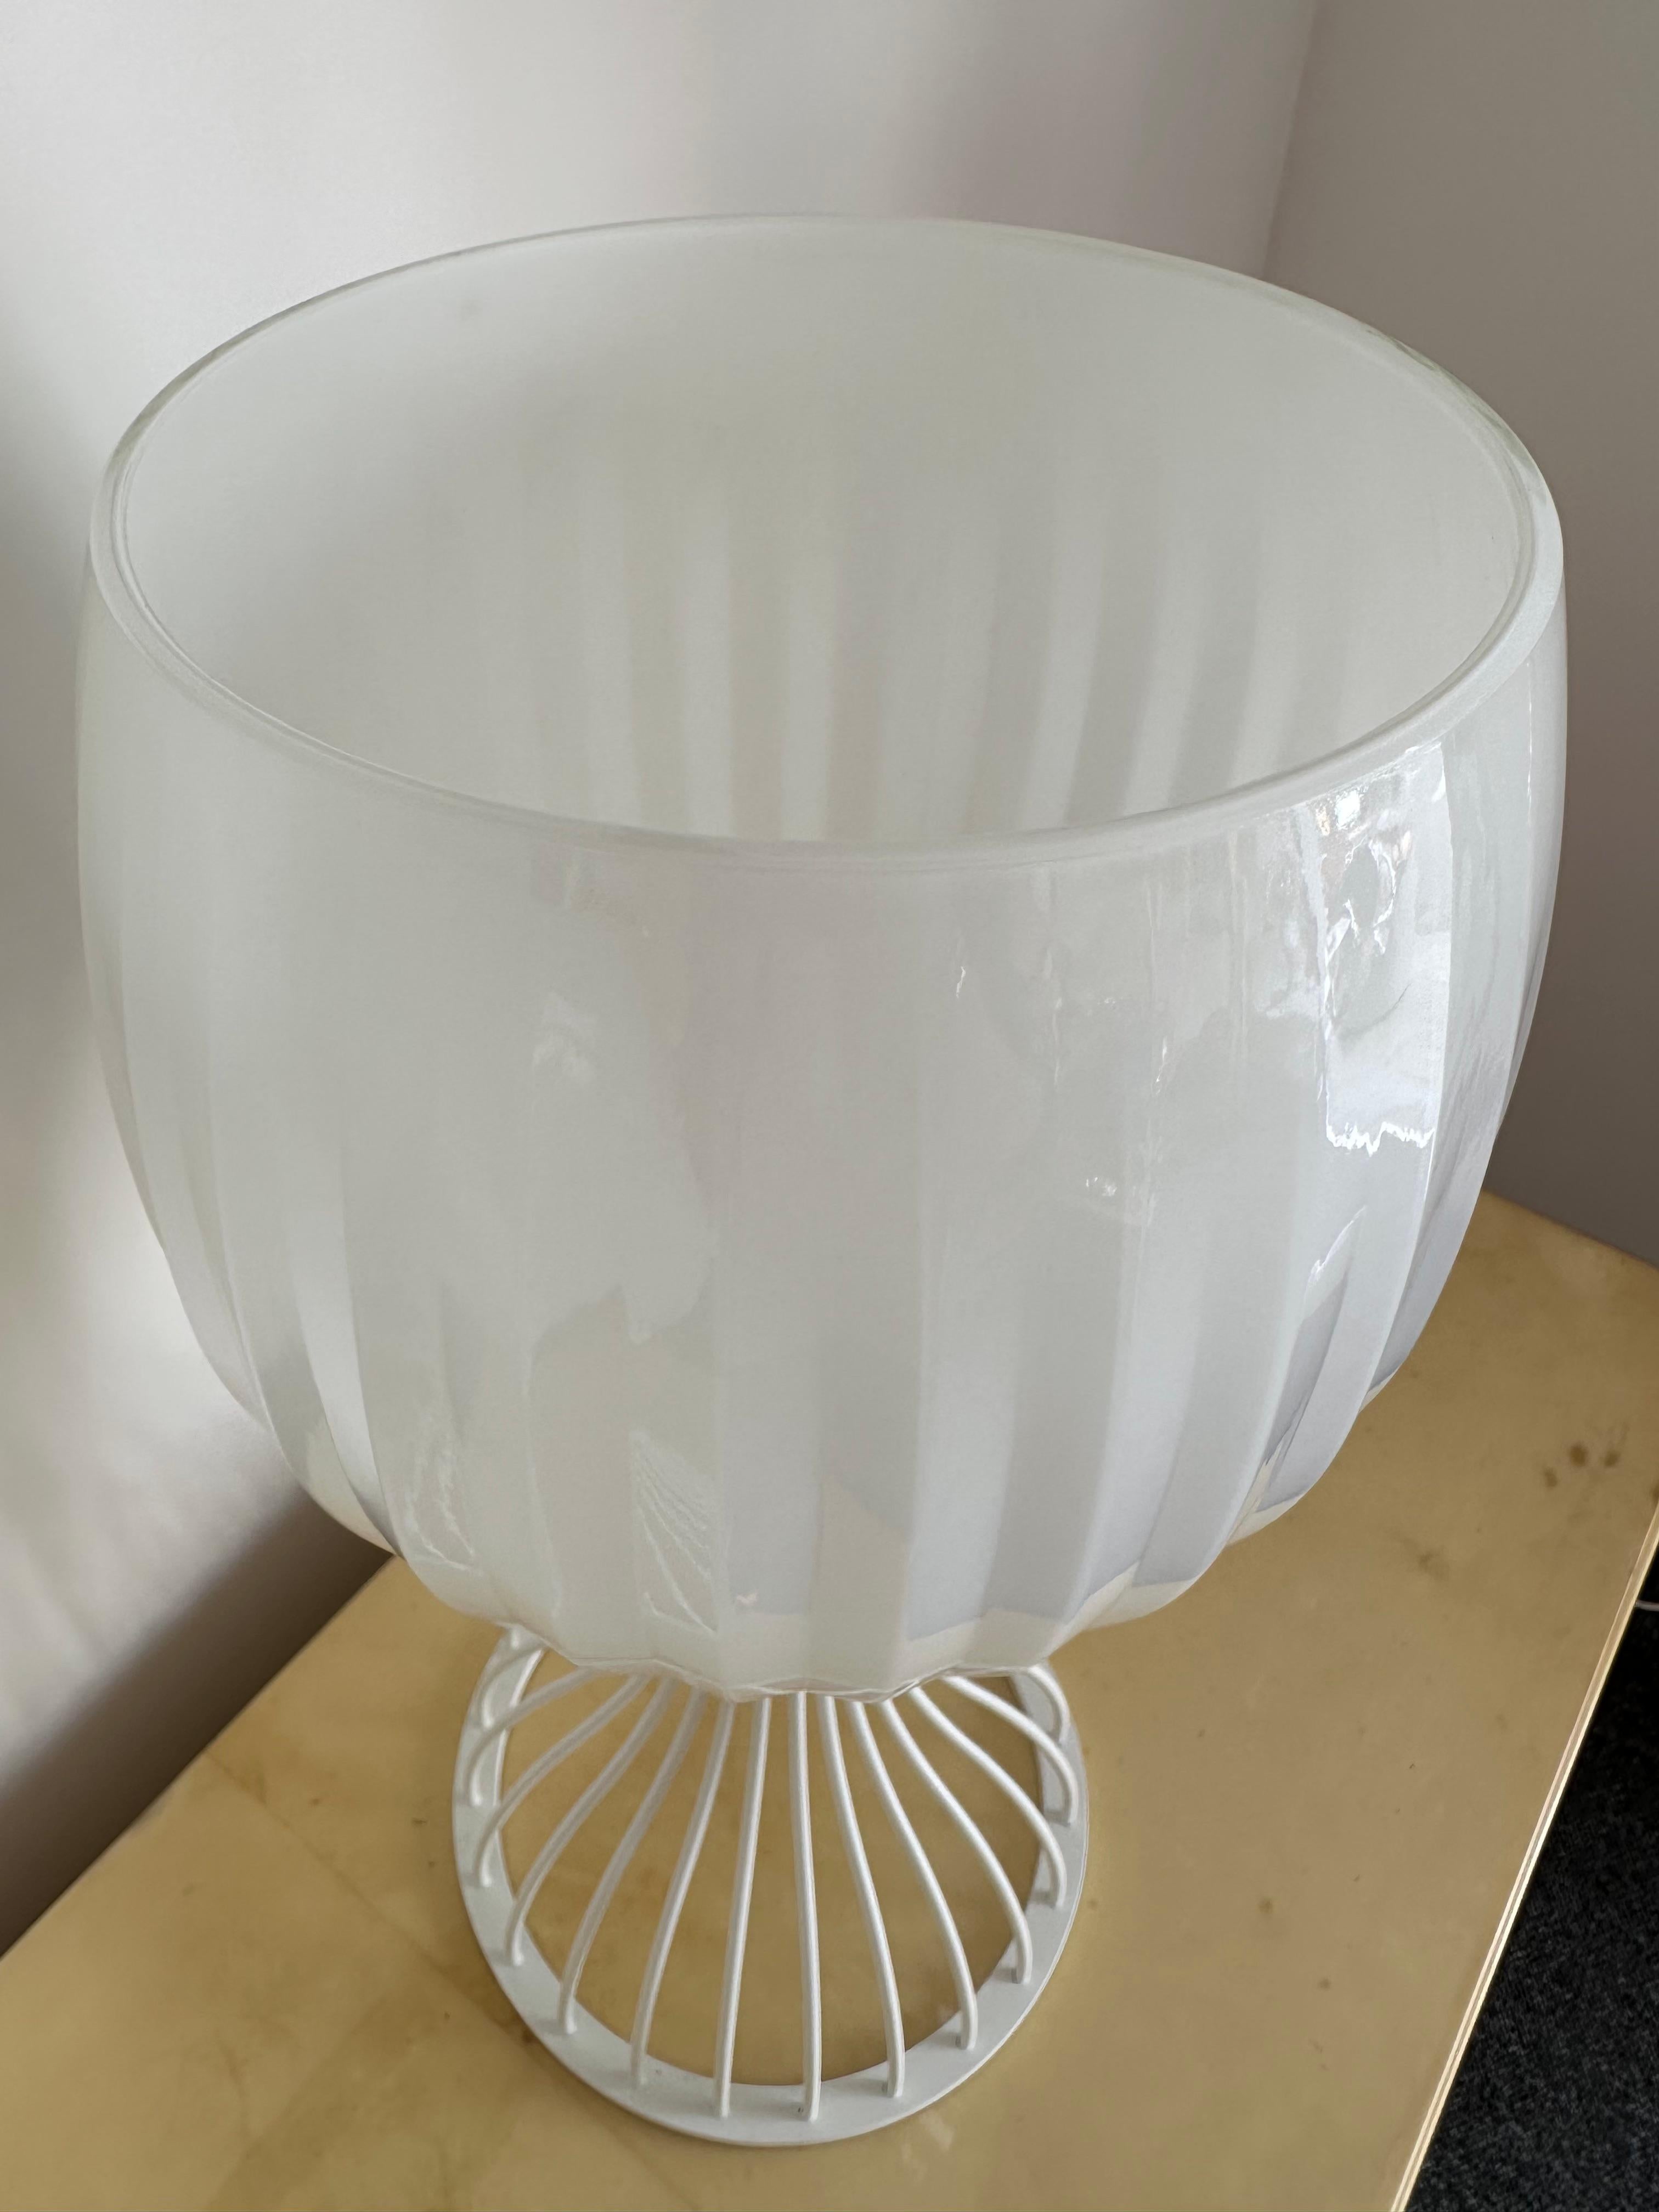 Pair of Lamps Cup Murano Glass and White Metal by Vistosi, Italy, 1990s For Sale 1